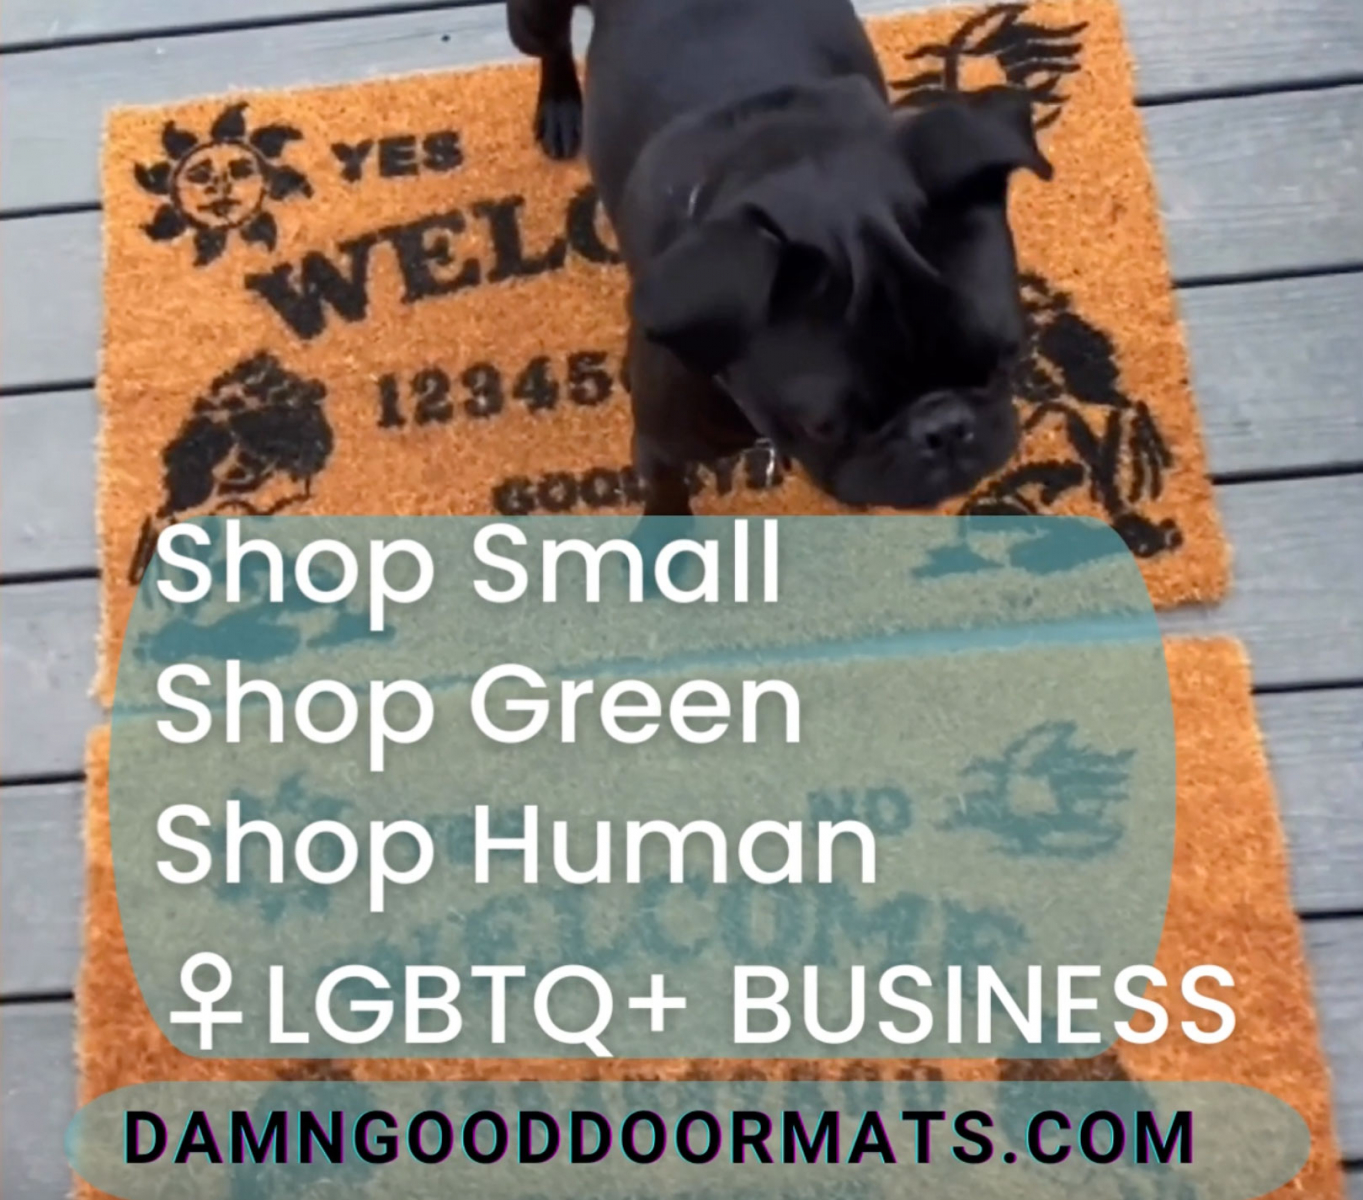 promo graphic for damn good doormats. support small, green woman owned, LGBTQ queer owned business